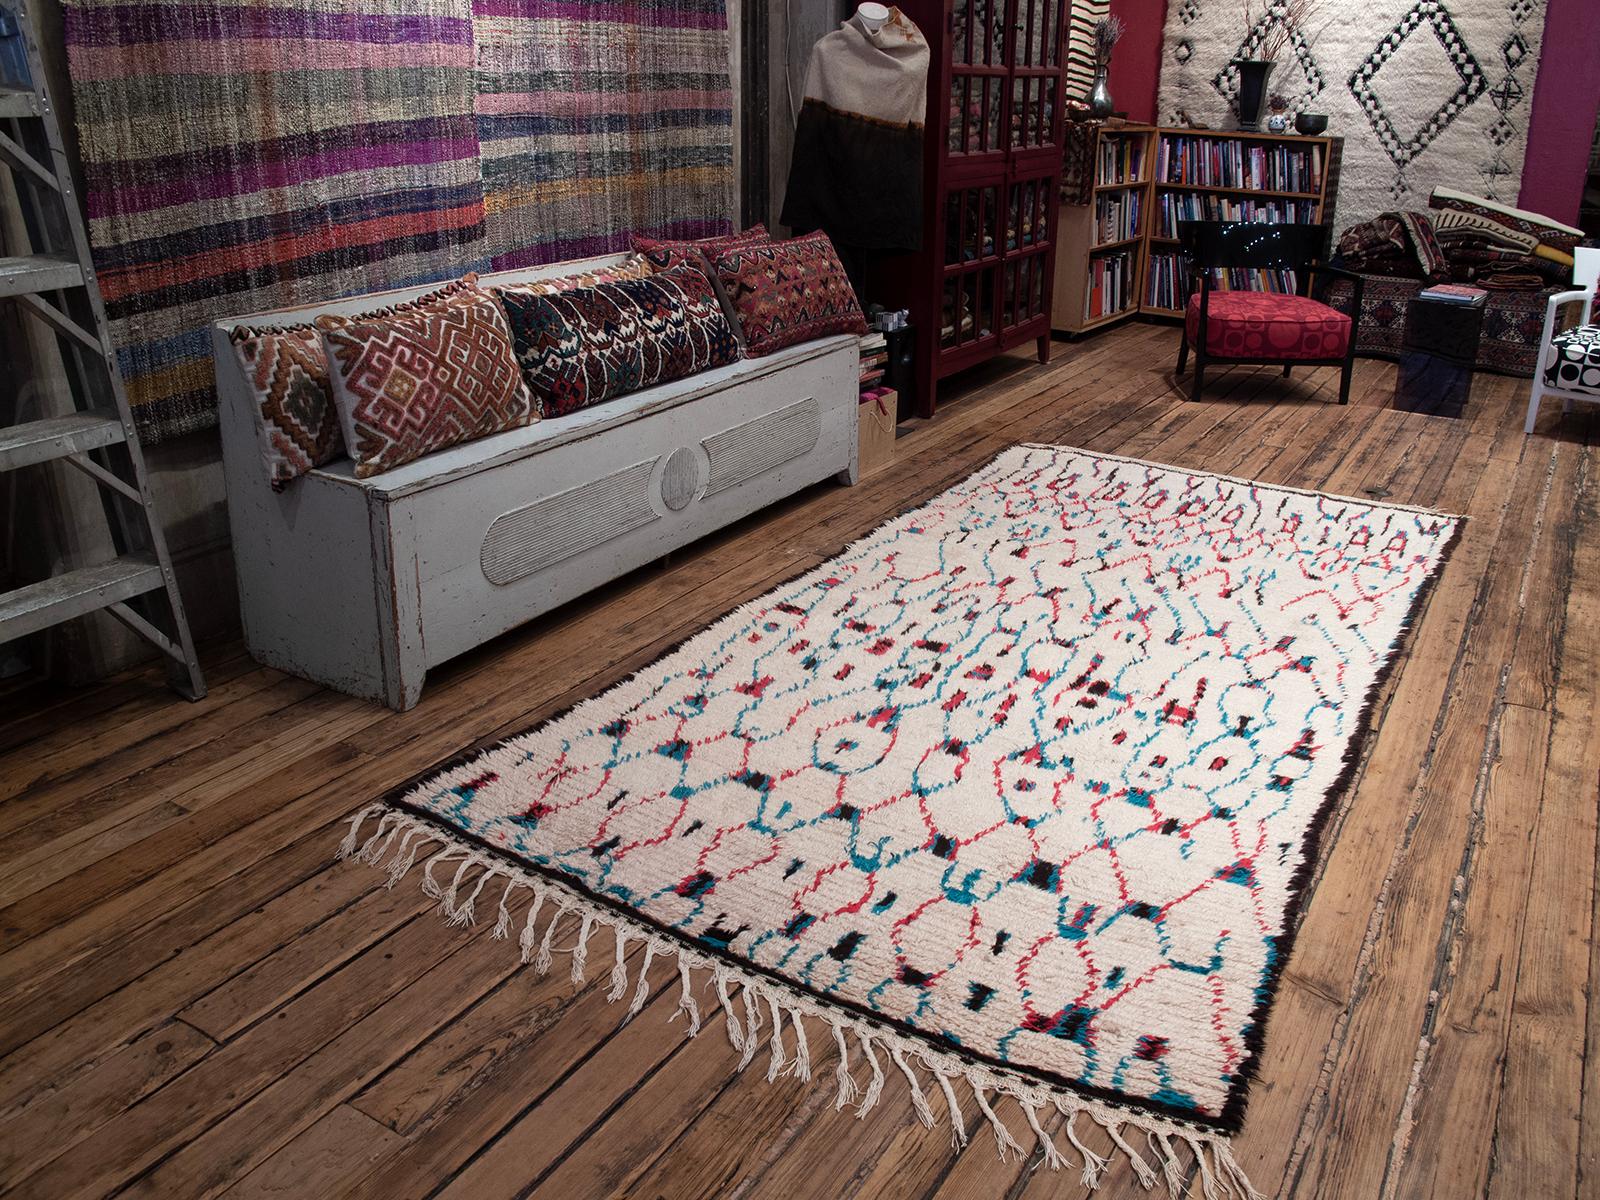 A lovely Moroccan Berber rug from the Azilal province in the Central High Atlas Mountains with a delicately and whimsically drawn grid design on a white background. Generous proportions for the type.

The rugs of this remote region have remained a